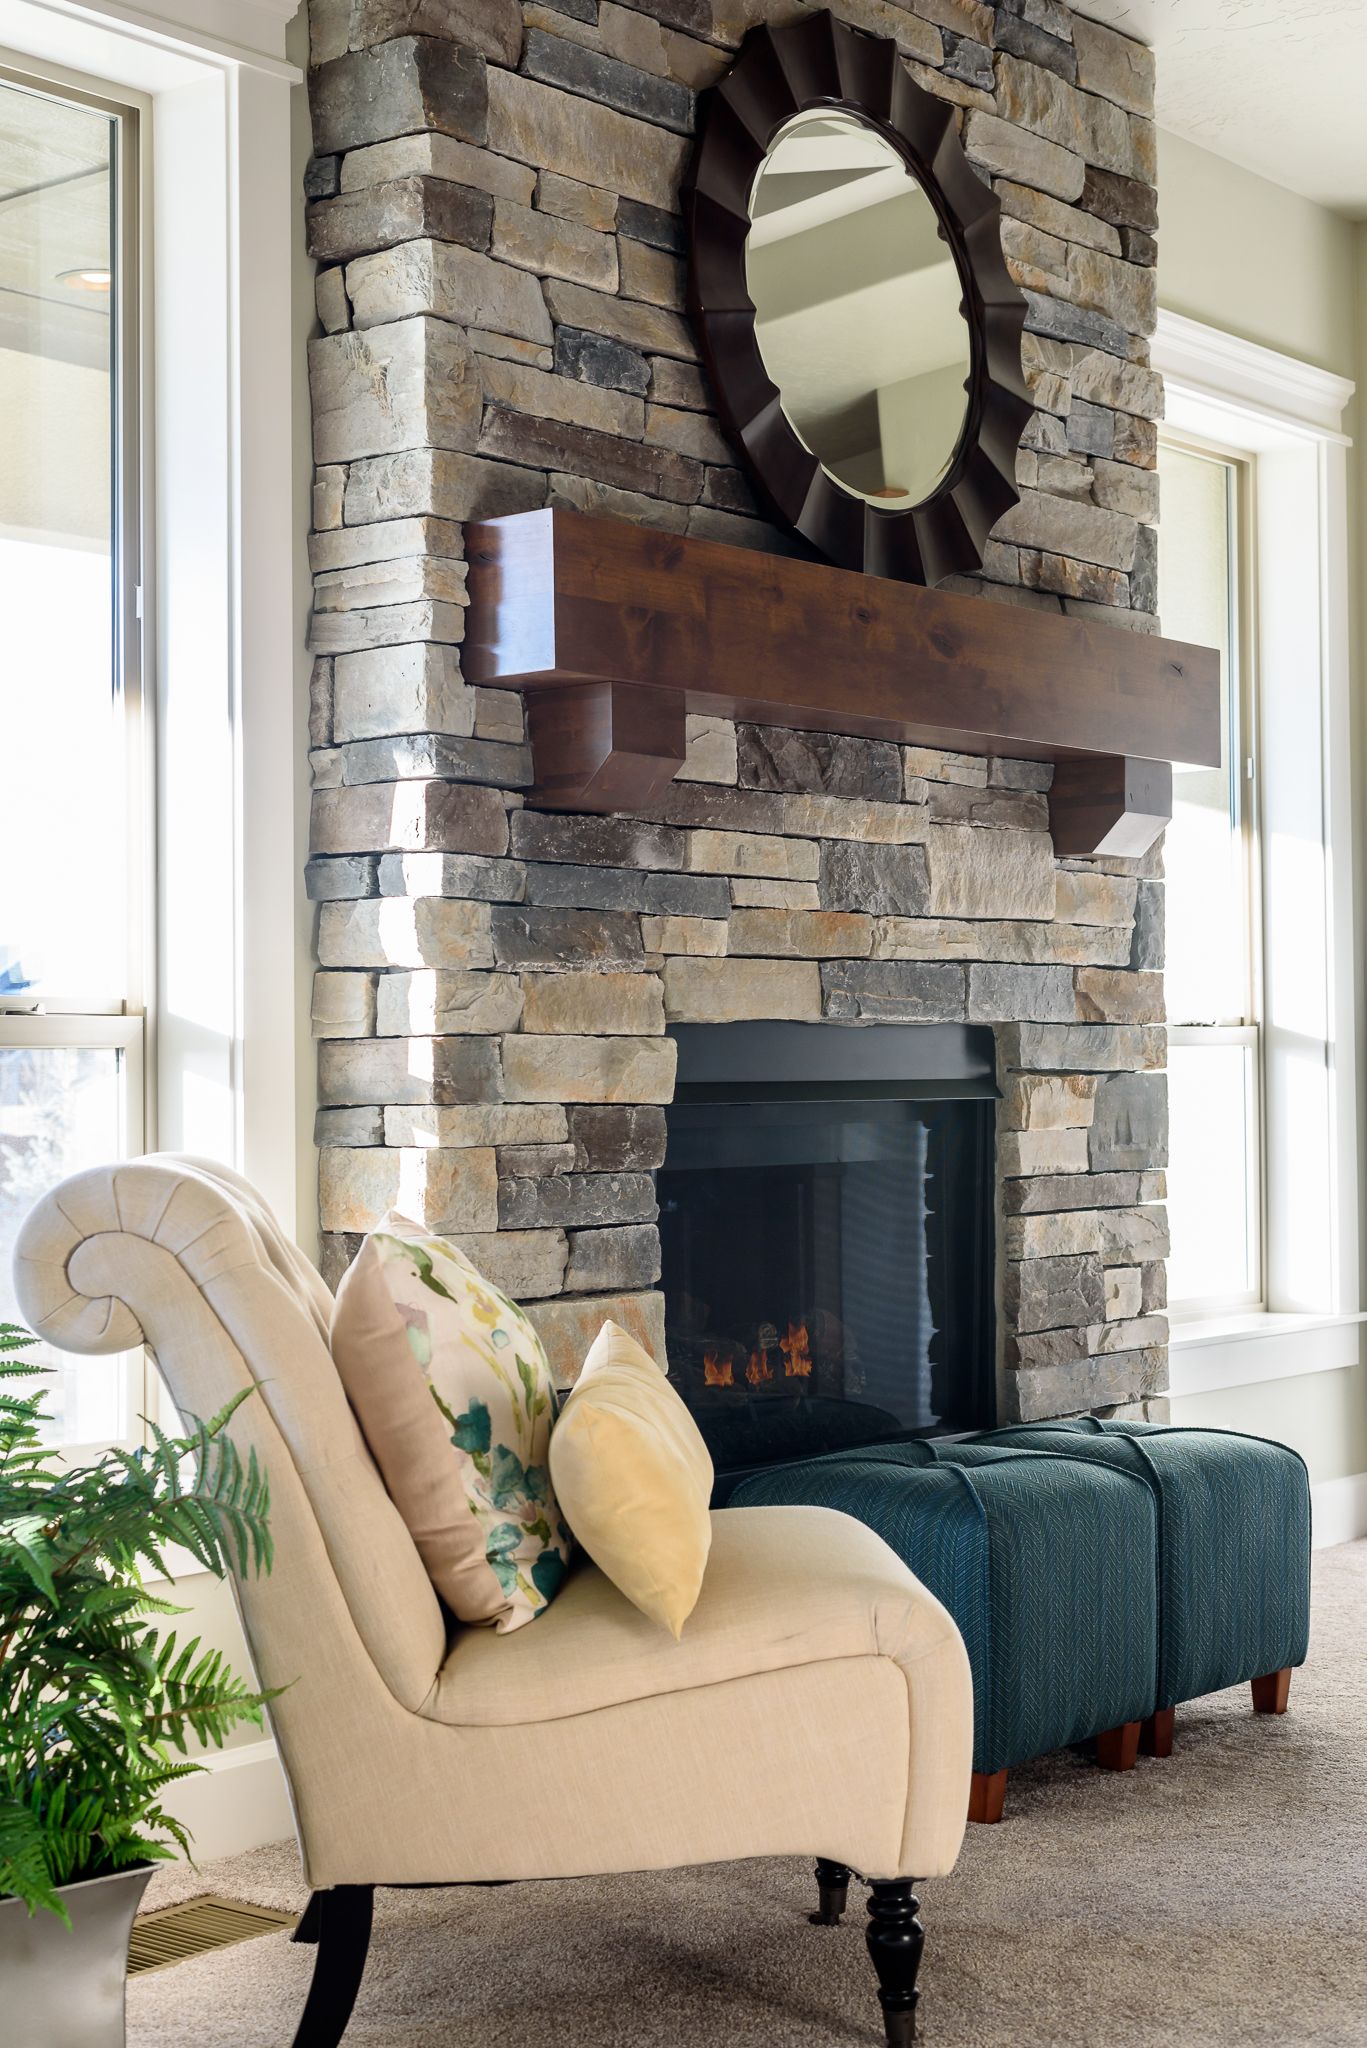 Rustic Mantels for Stone Fireplaces Luxury Echo Ridge Country Ledgestone On This Floor to Ceiling Stone